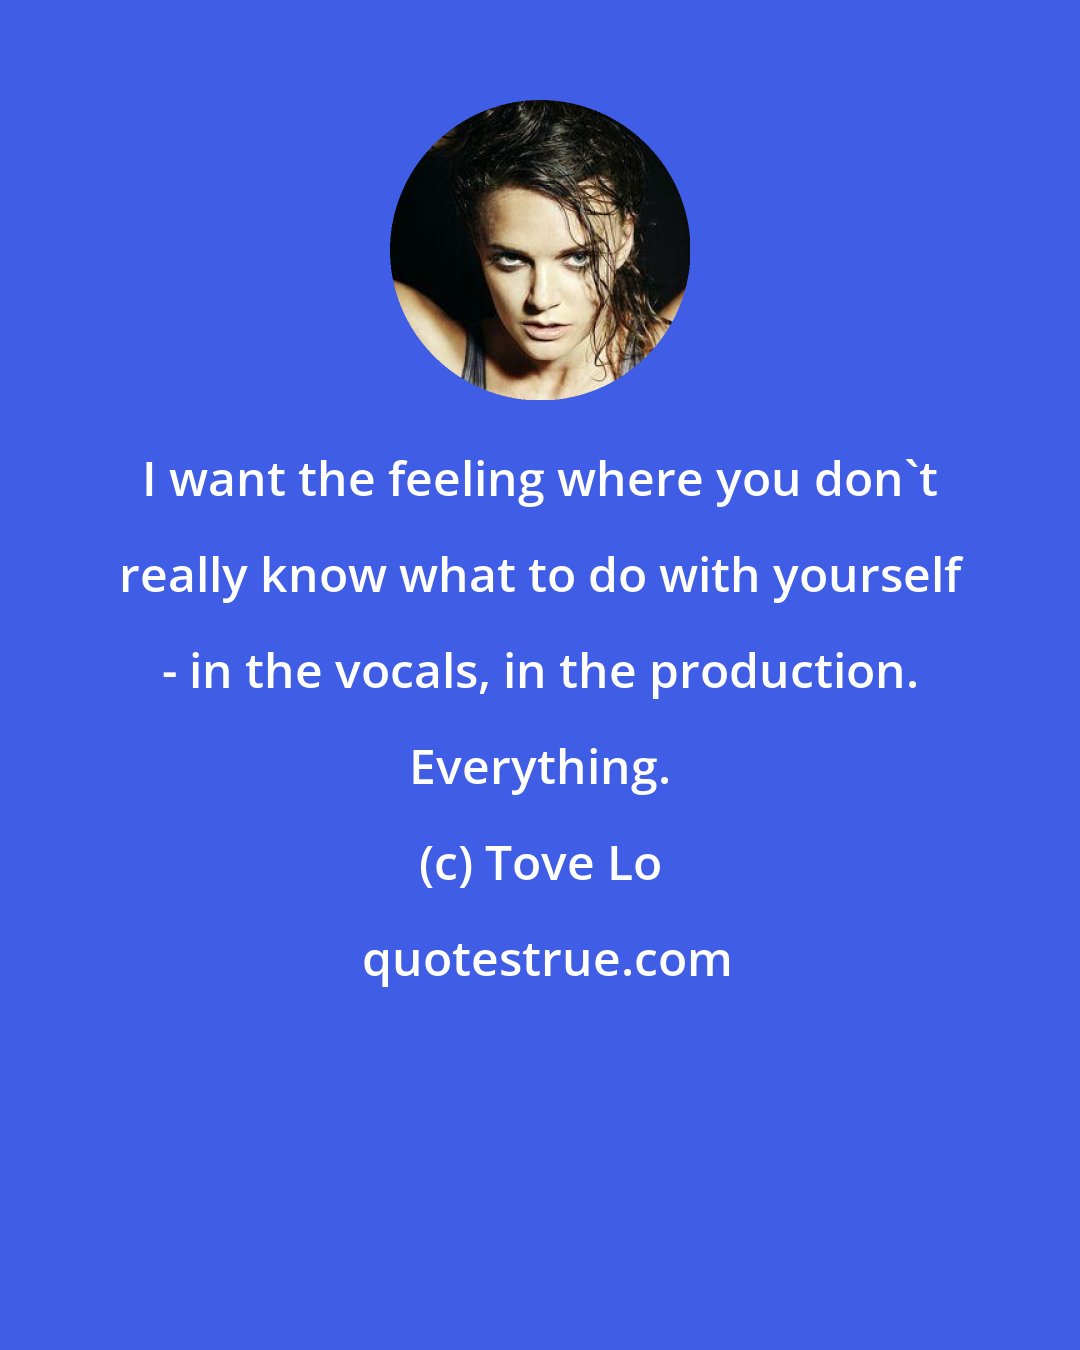 Tove Lo: I want the feeling where you don't really know what to do with yourself - in the vocals, in the production. Everything.